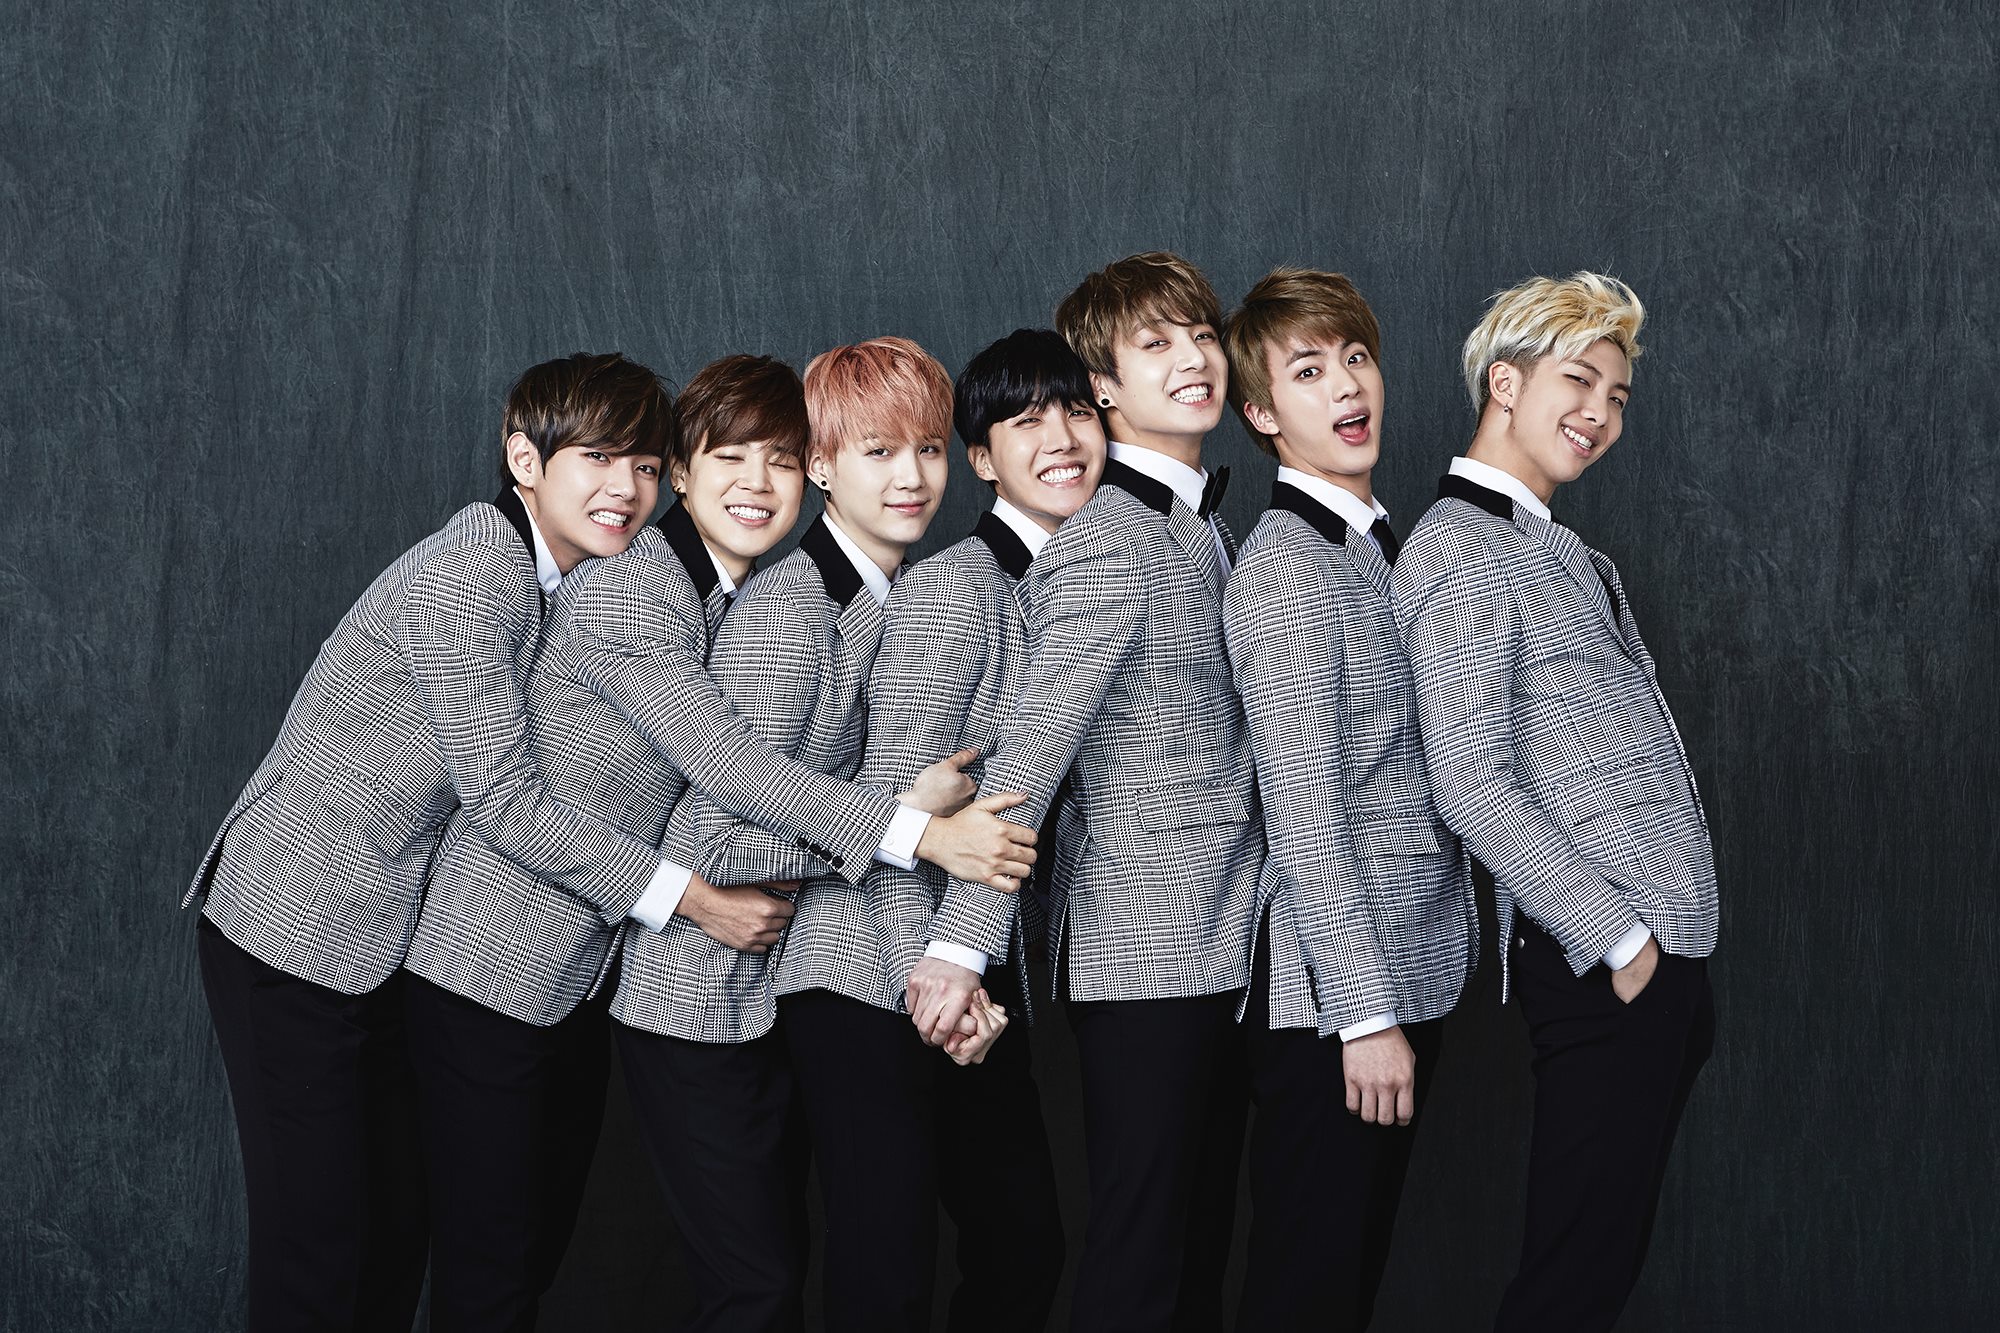 bts wallpaper hd,social group,people,event,photography,team